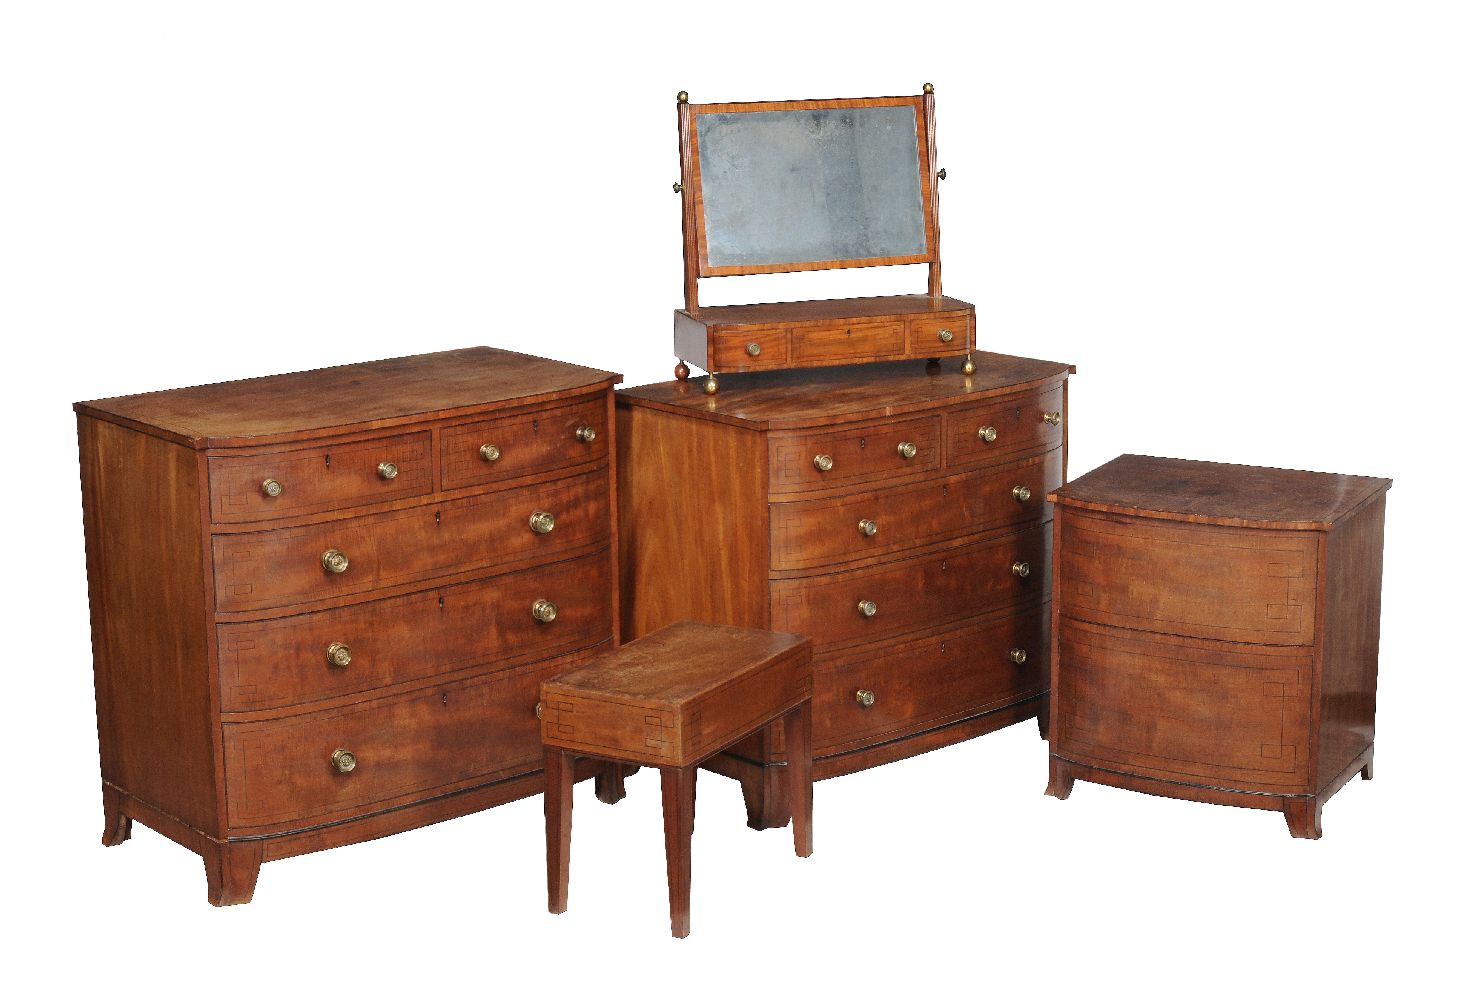 A Regency mahogany and inlaid suite of bedroom furniture, circa 1815, comprising; a companion pair